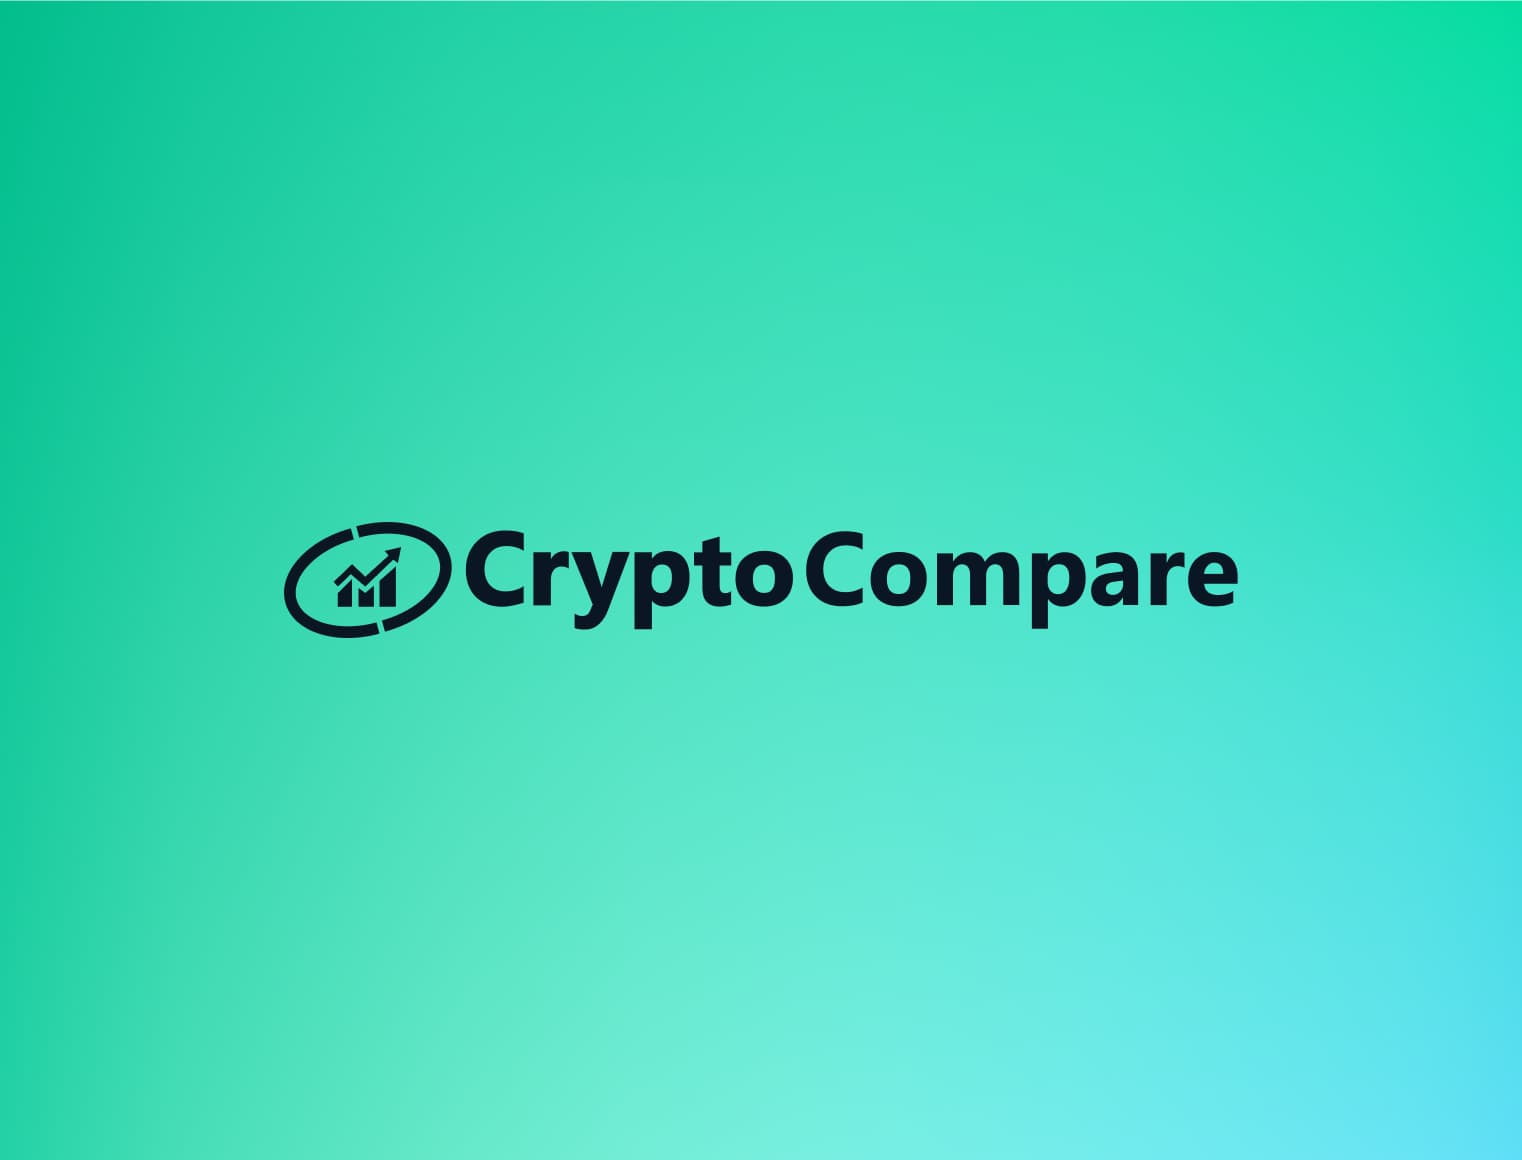 ETC Group Chooses CryptoCompare Data For Market Leading Digital Asset-Backed Products